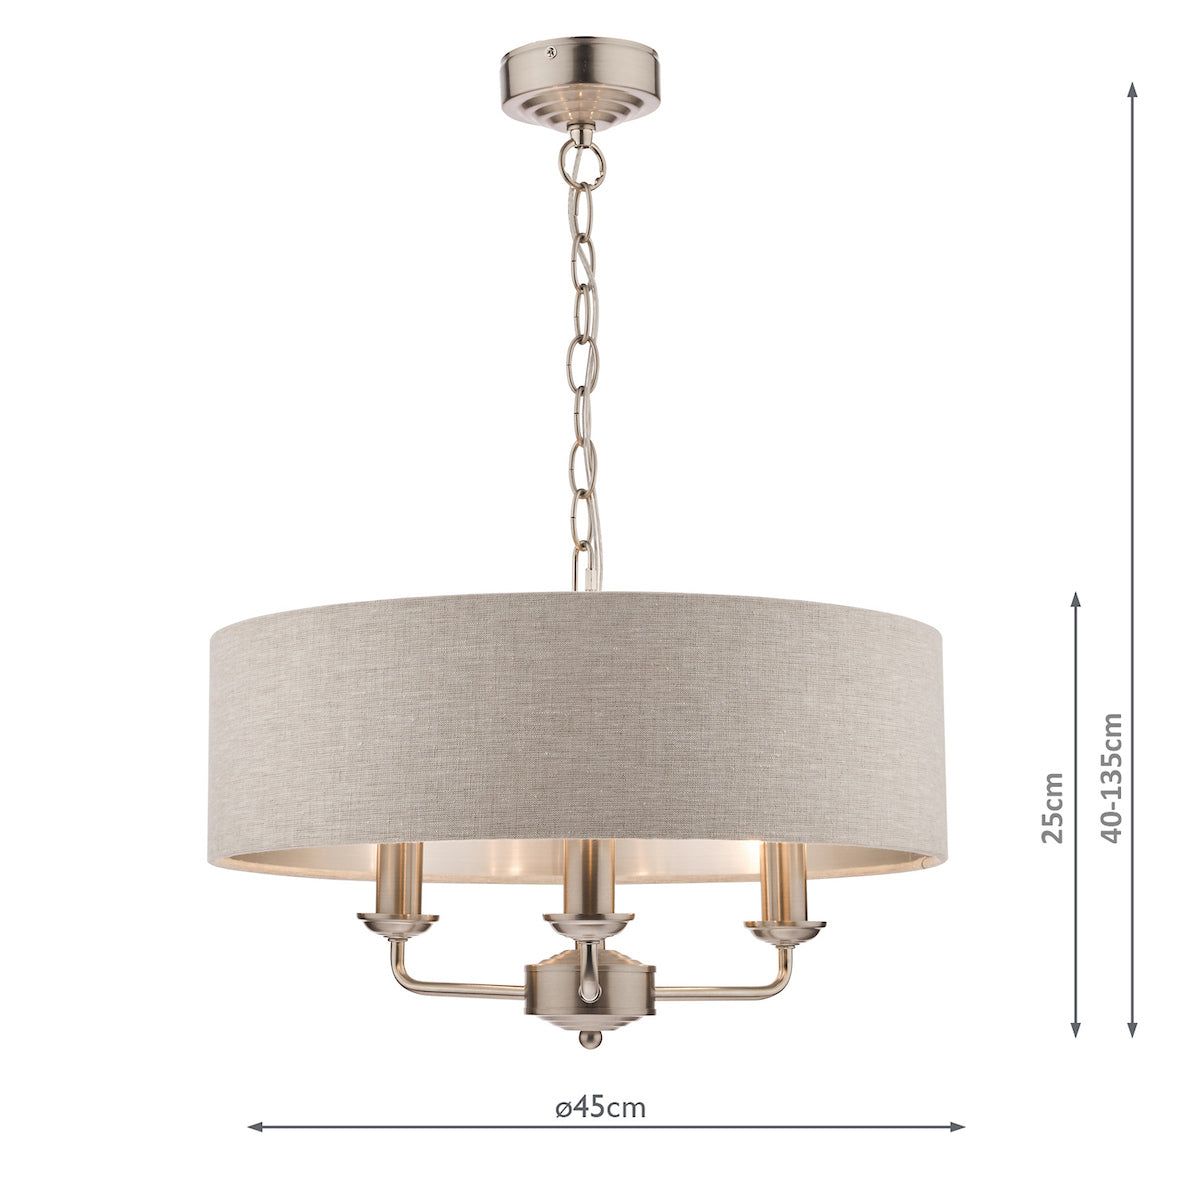 Laura Ashley Sorrento Brushed Chrome LA3567326-Q  3 Light Armed Fitting Ceiling Light with Natural Shade